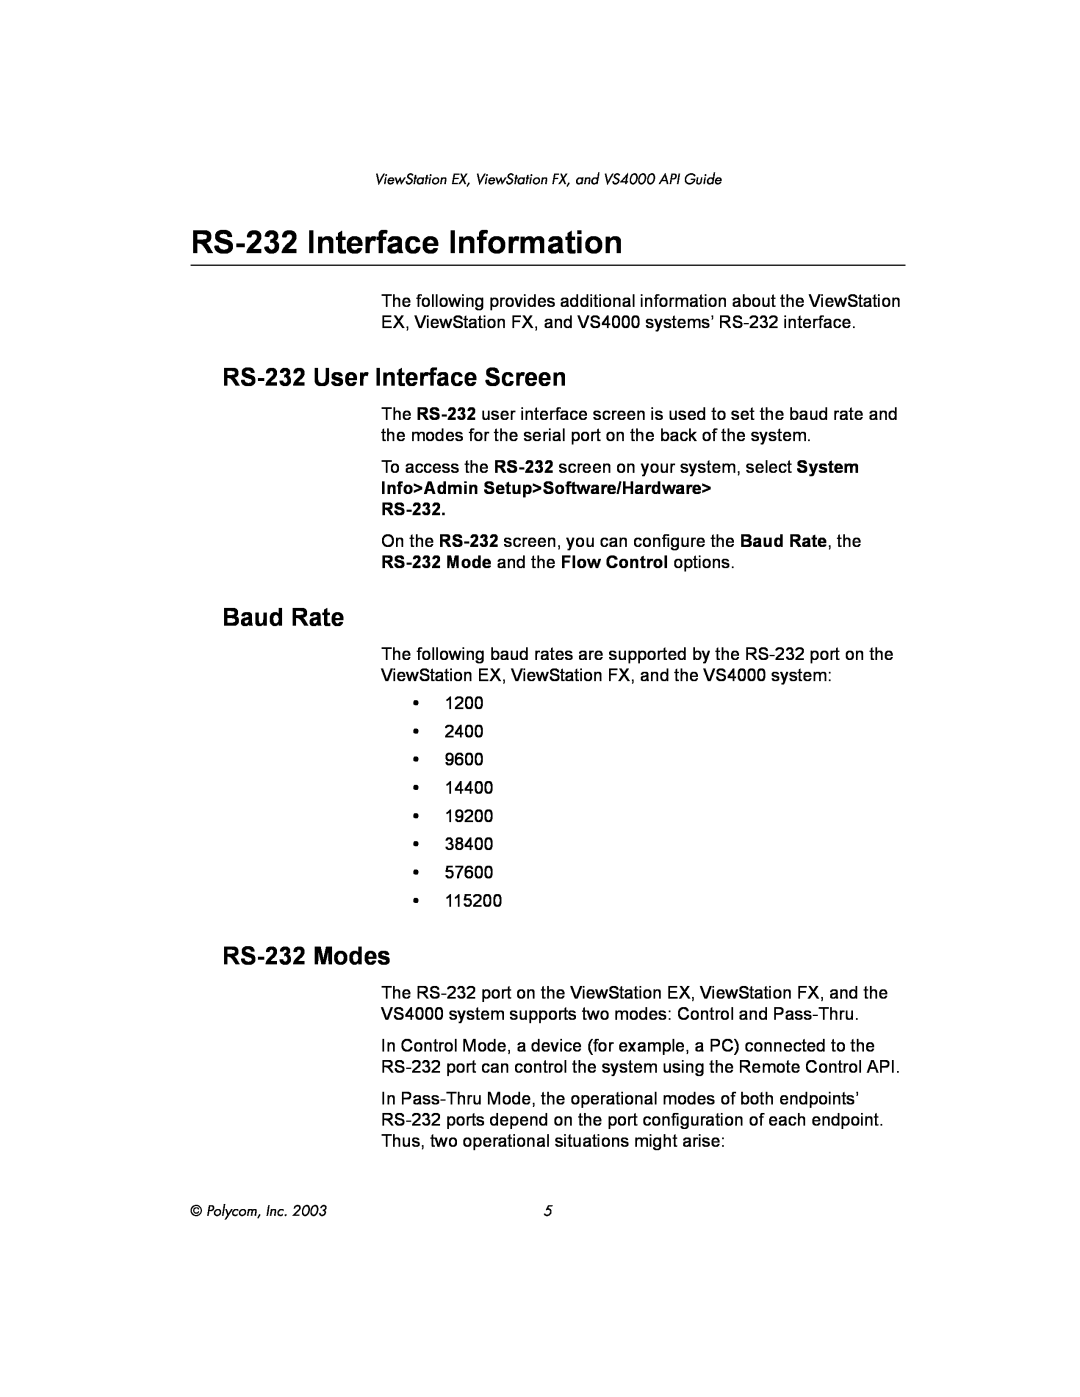 Polycom VIEWSTATION EX manual RS-232Interface Information, RS-232User Interface Screen, Baud Rate, RS-232Modes 